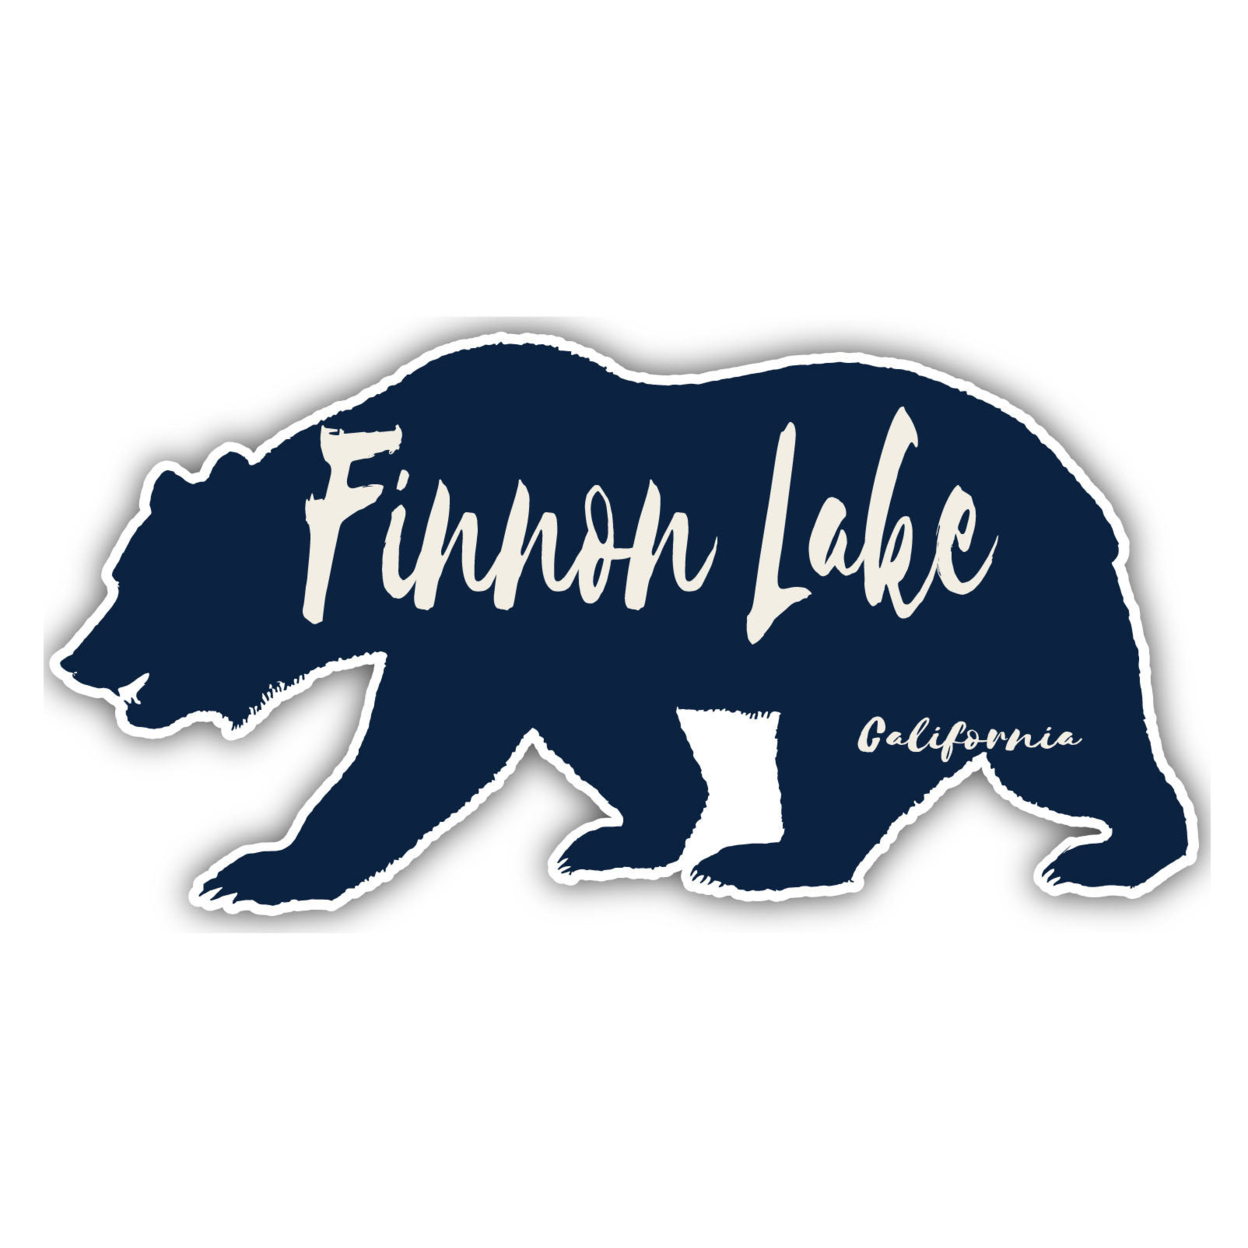 Finnon Lake California Souvenir Decorative Stickers (Choose Theme And Size) - 4-Pack, 4-Inch, Camp Life